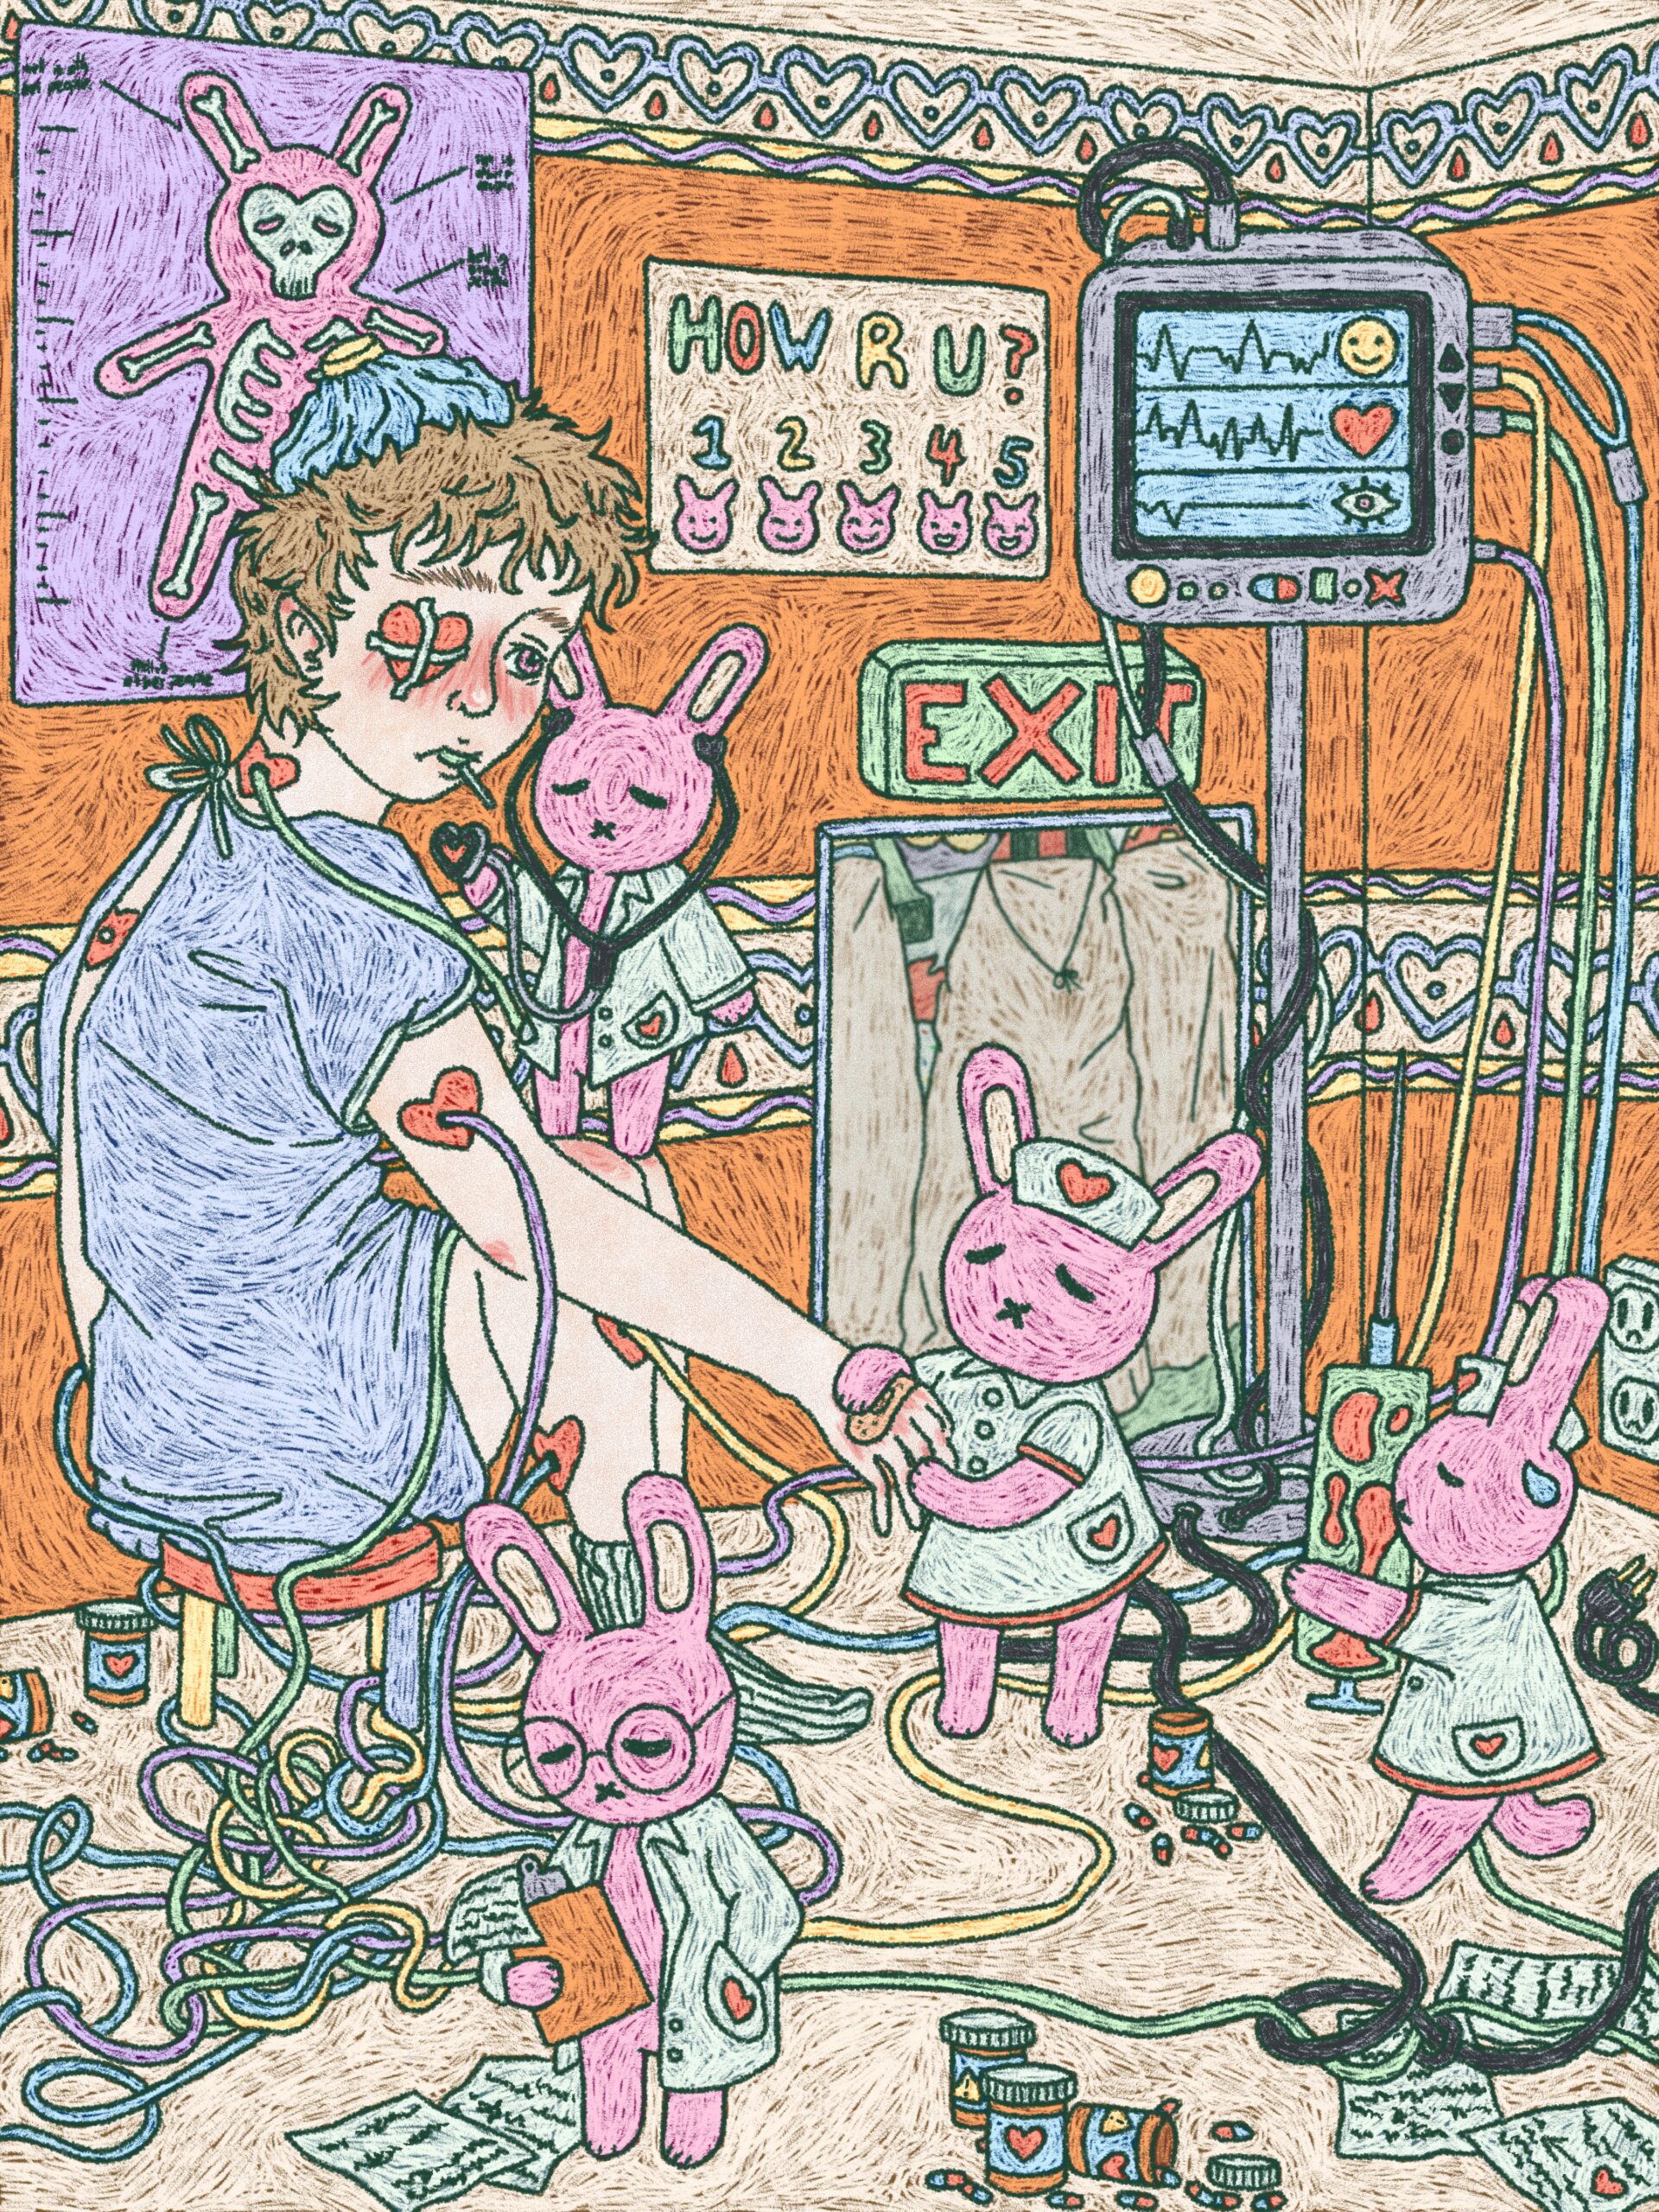 In this digital drawing, small sad pink bunnies in green doctor and nurse outfits tend to a pale young person with short messy brown hair, sitting in a blue examination gown. Tubes of various colours snake out of their body at points marked by red hearts. A red heart is taped over one eye, skin flushed angry and red. The room is chaotic, with prescriptions, pill bottles, and pills strewn about the floor, and tubes and wires tangled all around.